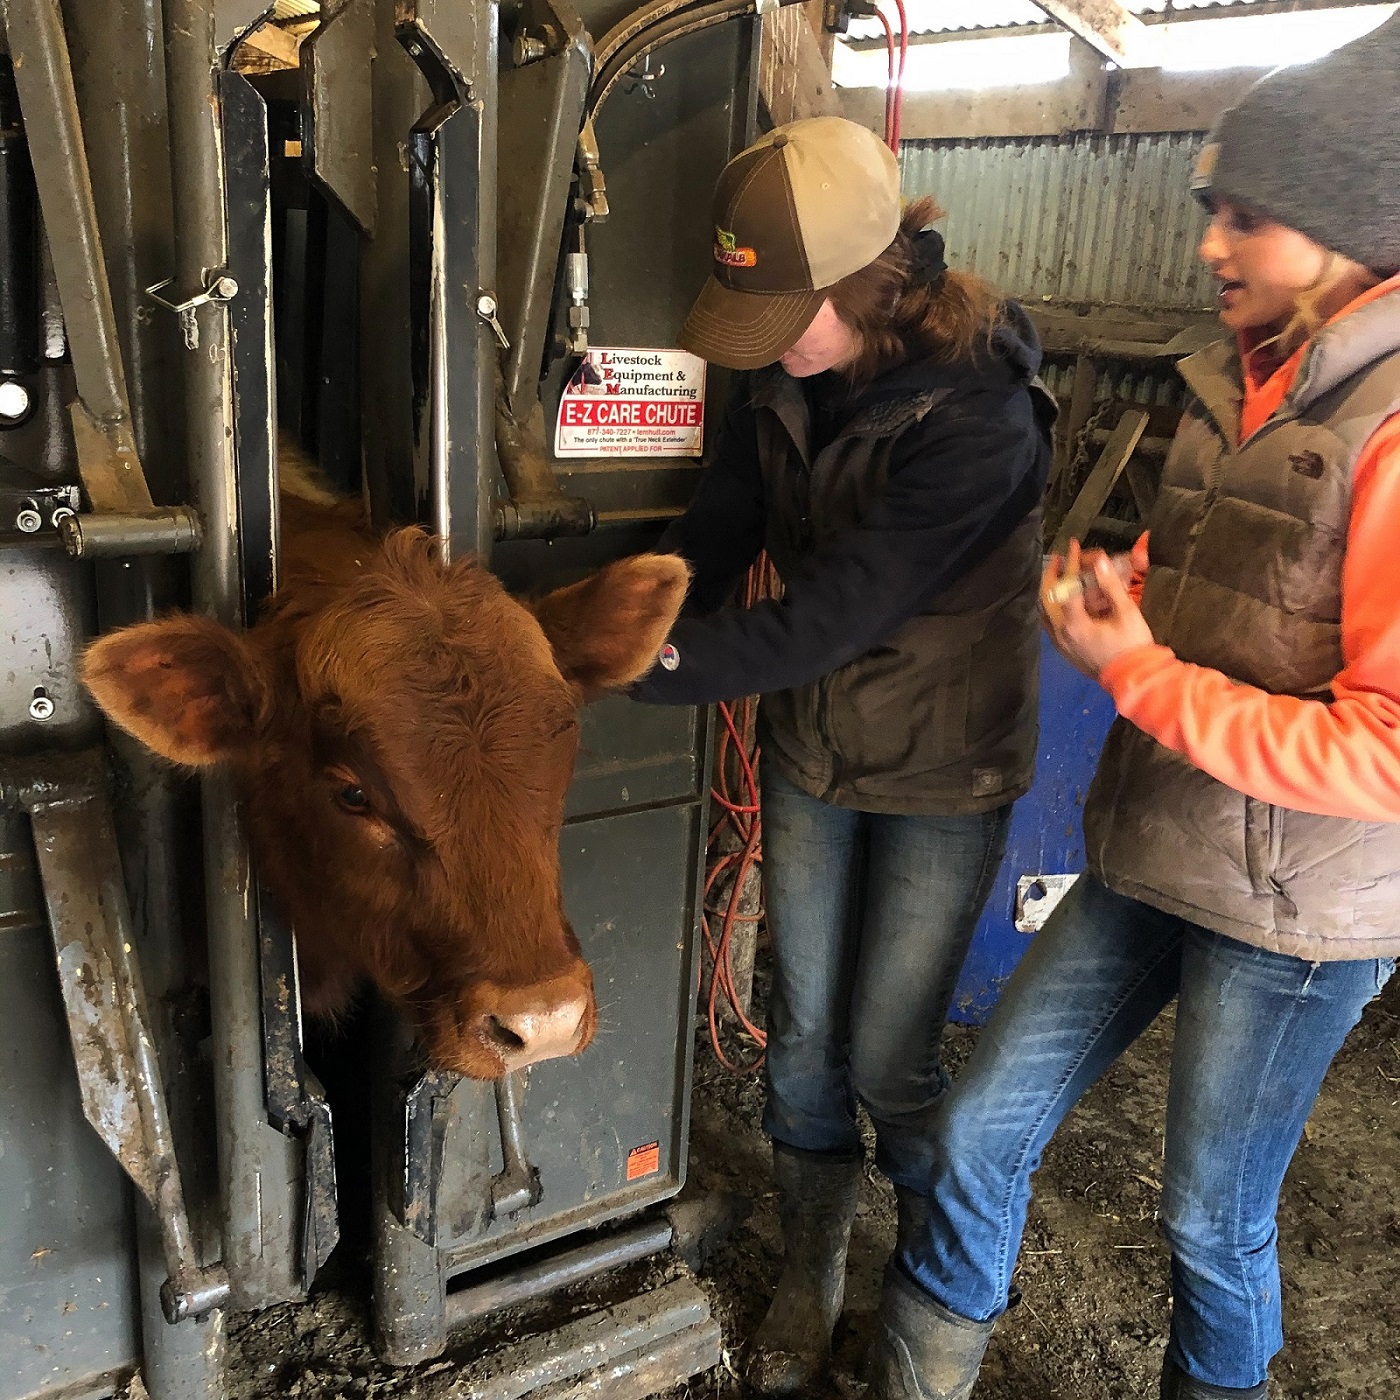 Kelsey Geraets and a female coworker tending to a cow in a shoot.